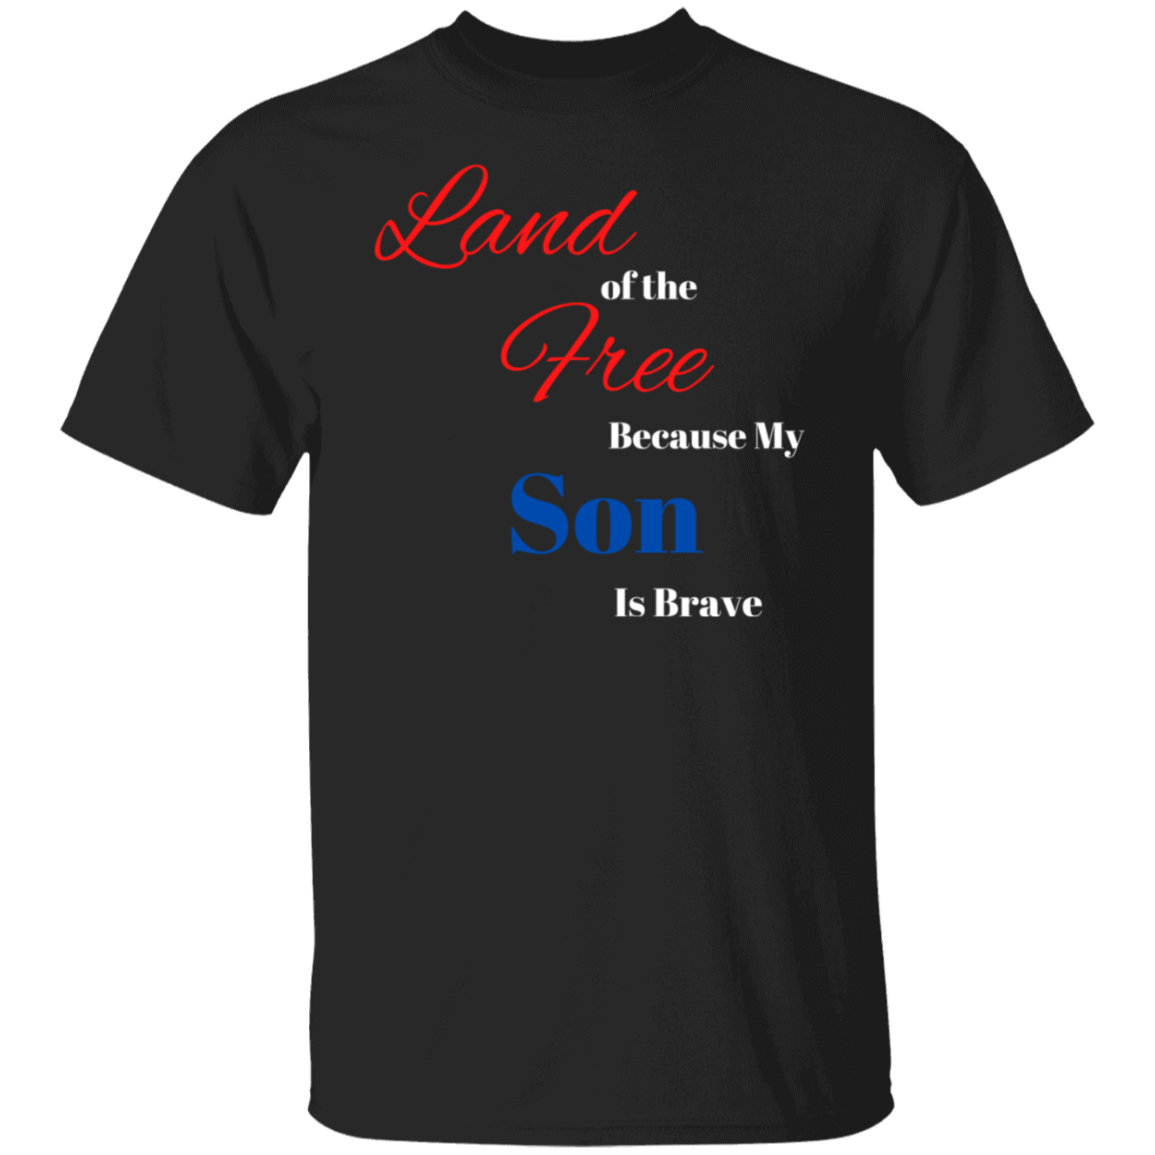 Land of the Free | Son T-Shirt